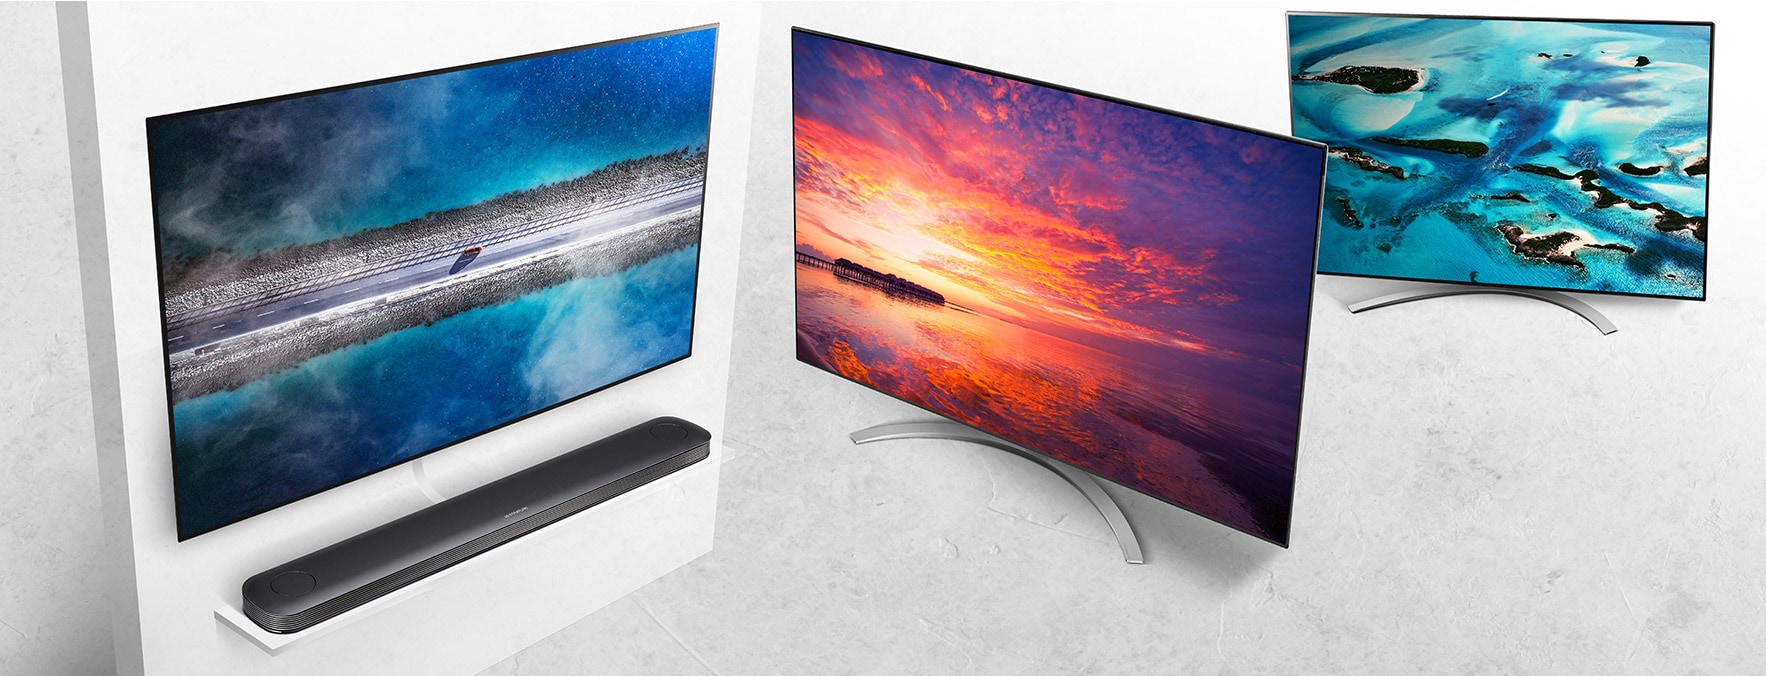 Discover LG NanoCell TV Lineup